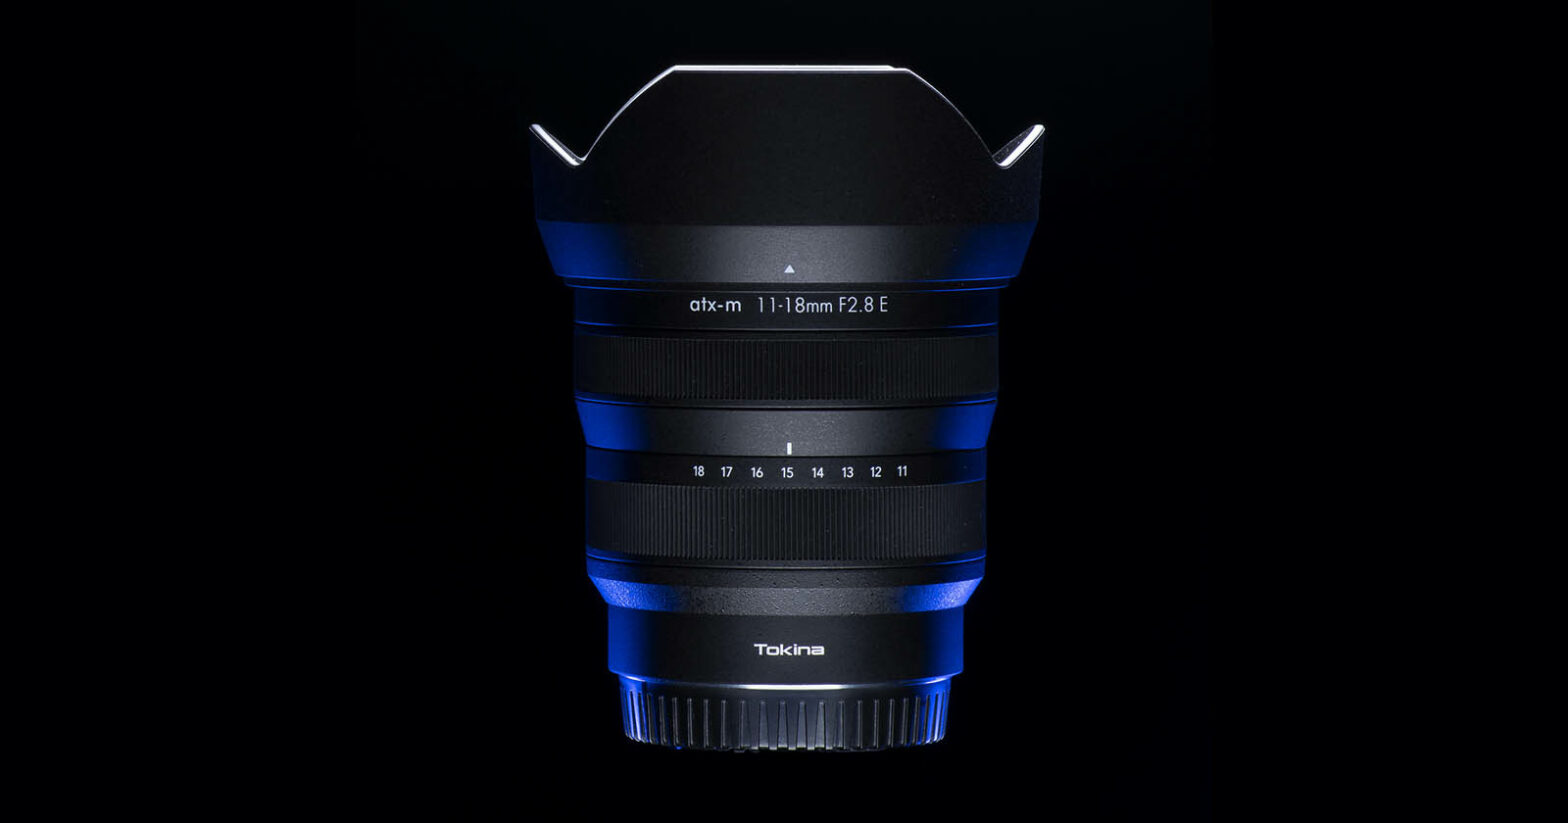 Deal Alert: Save $100 on the Tokina atx-m 11-18mm f/2.8 for Sony E